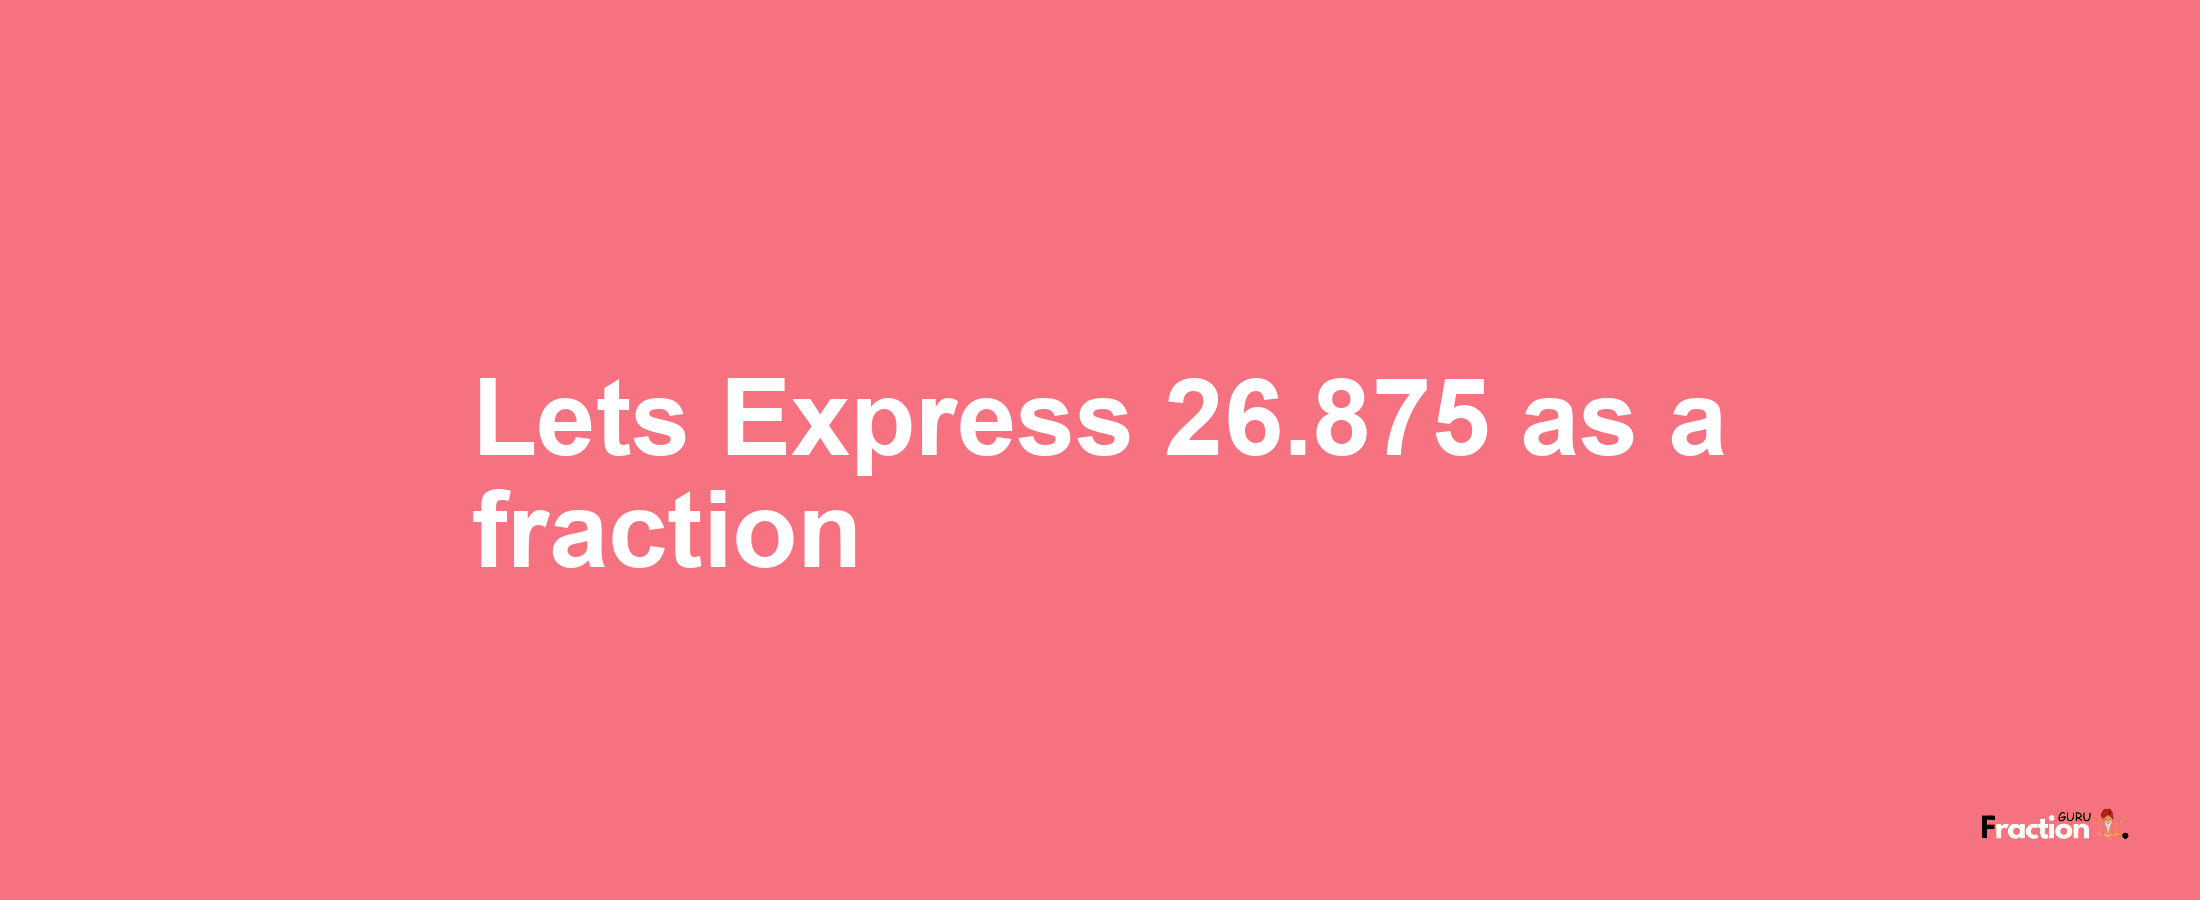 Lets Express 26.875 as afraction